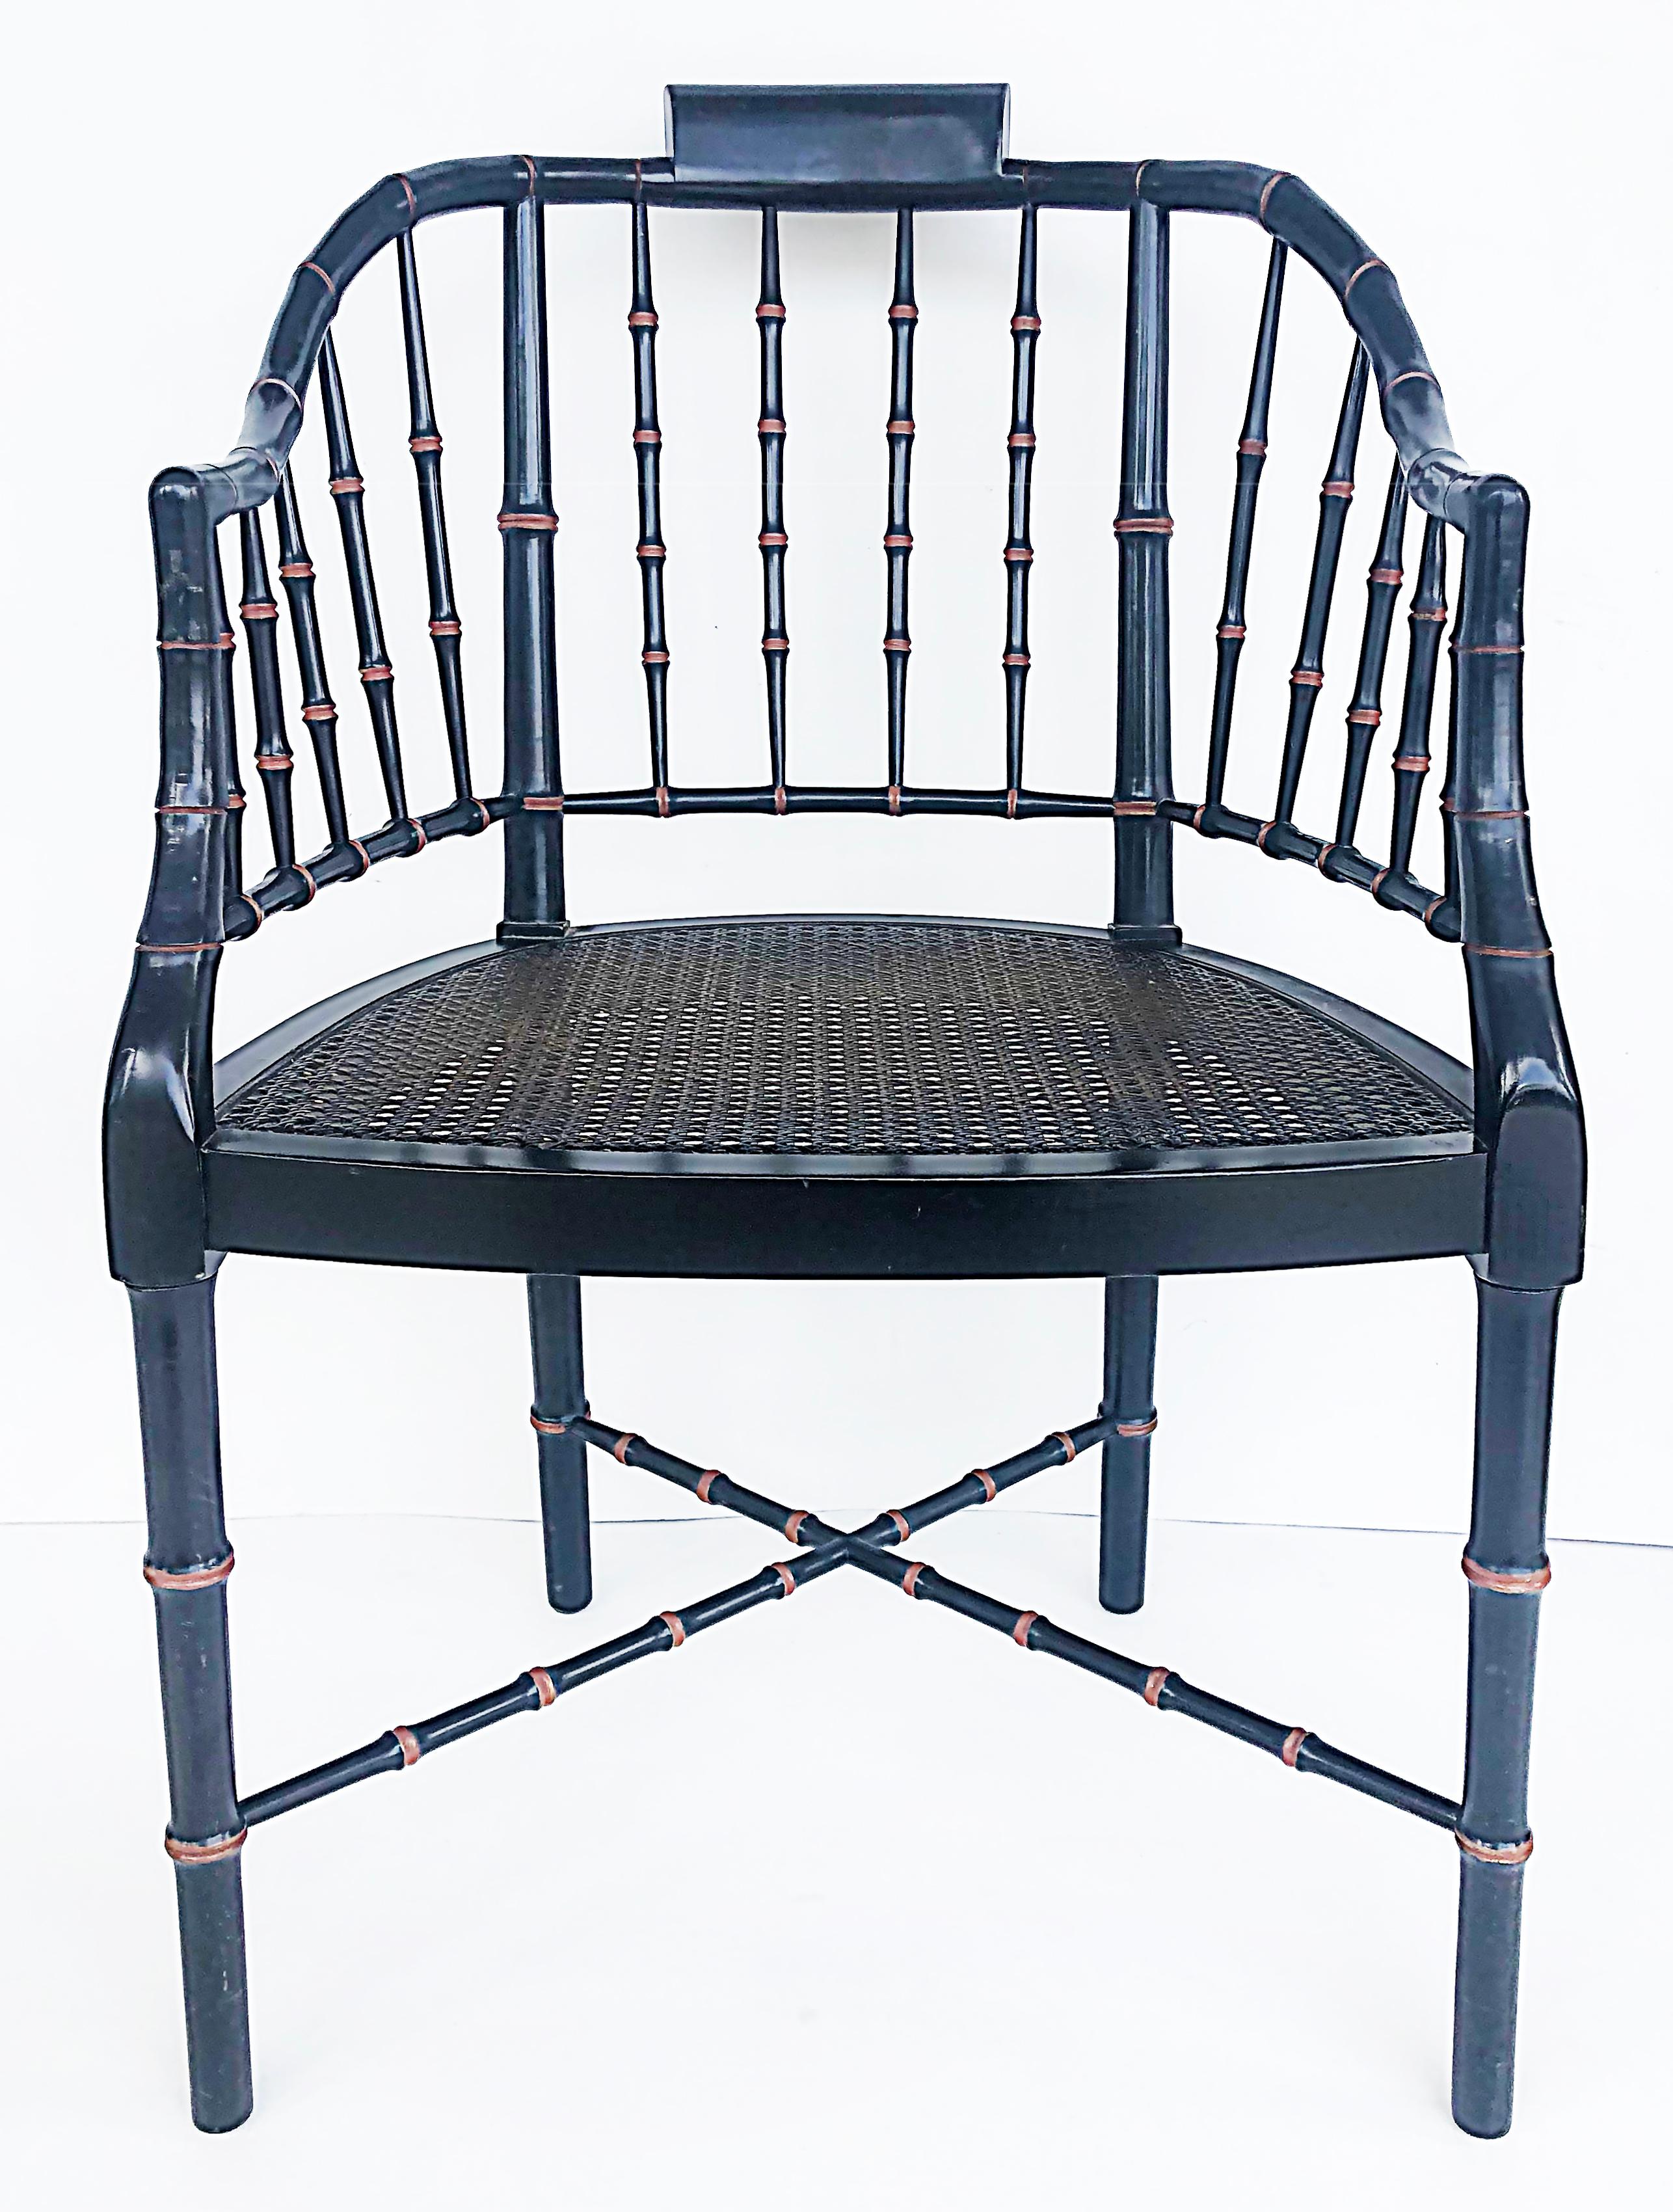 Baker Furniture faux-bamboo wood chair with caned seat 

Offered for sale is a fine Baker Furniture Company lacquered wood caned armchair with a caned seat. The chair is lacquered black with gold trim details. The Chair retains the original Baker